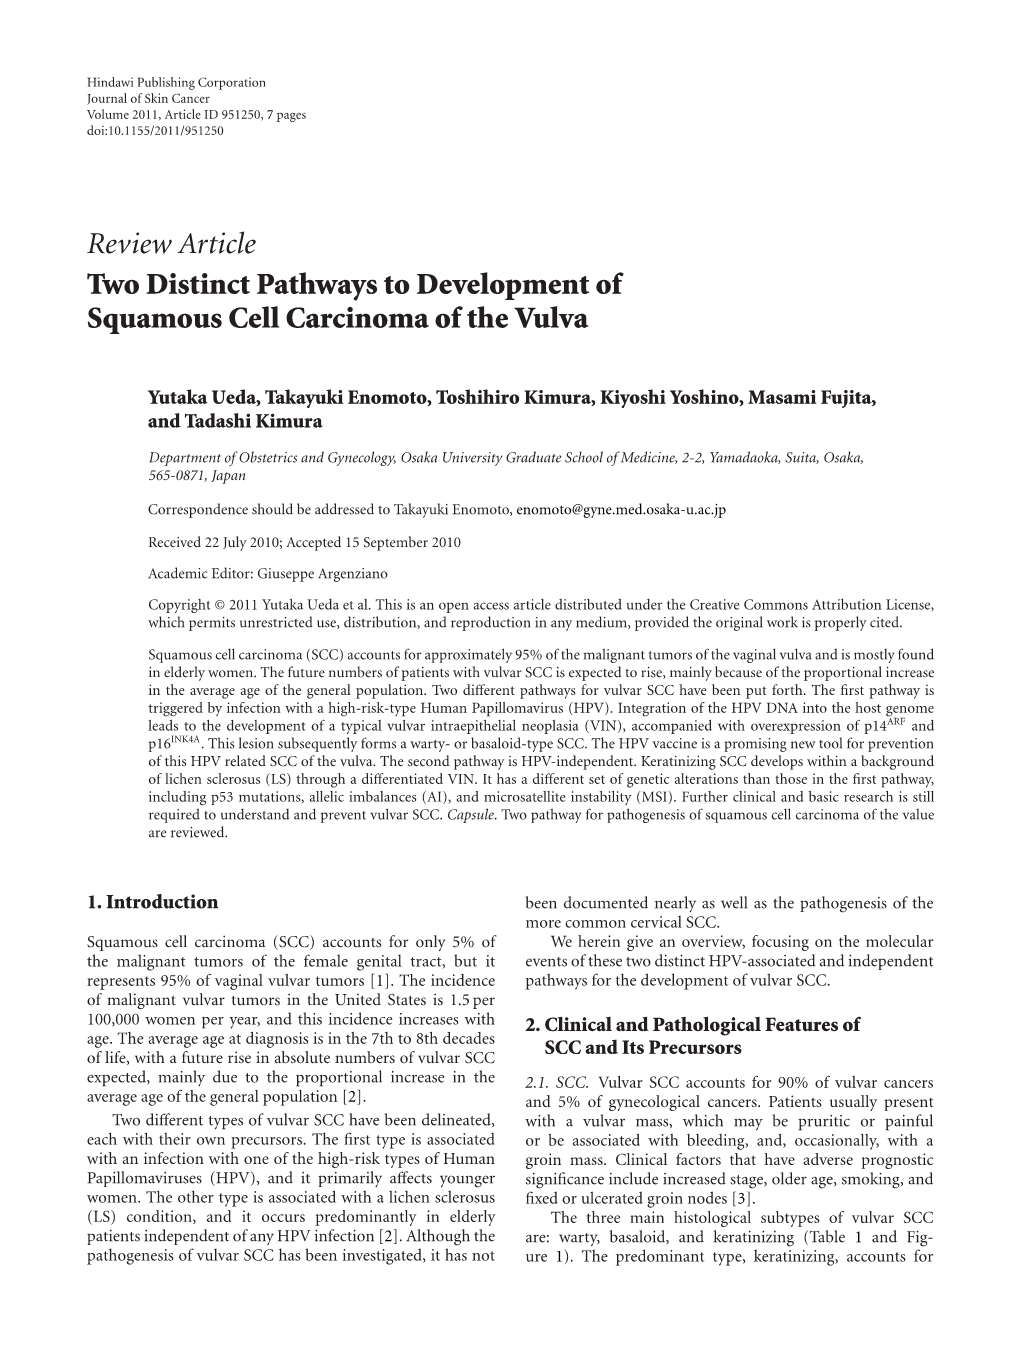 Review Article Two Distinct Pathways to Development of Squamous Cell Carcinoma of the Vulva